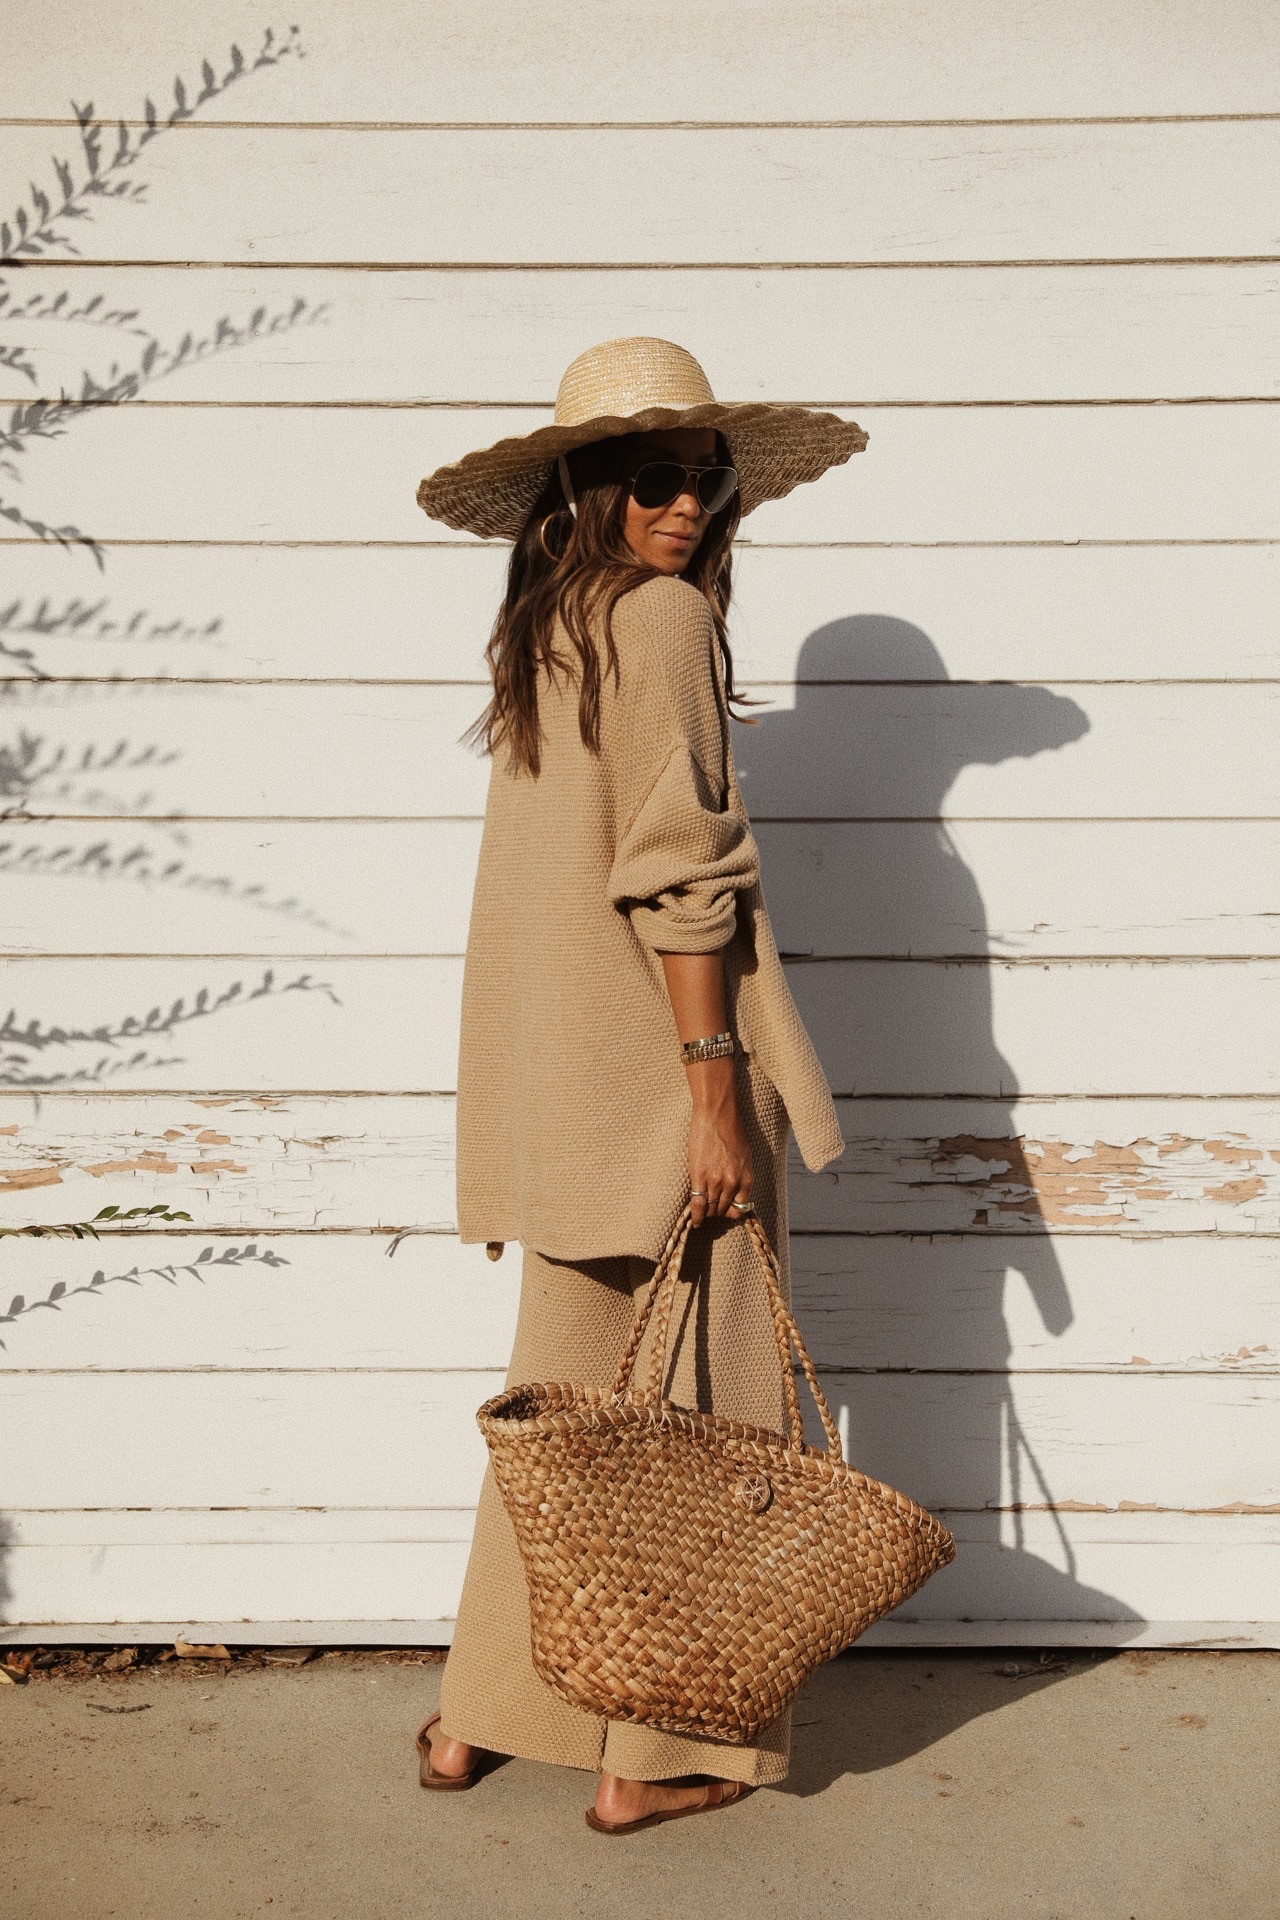 How to style Summer Neutrals – Sincerely Jules